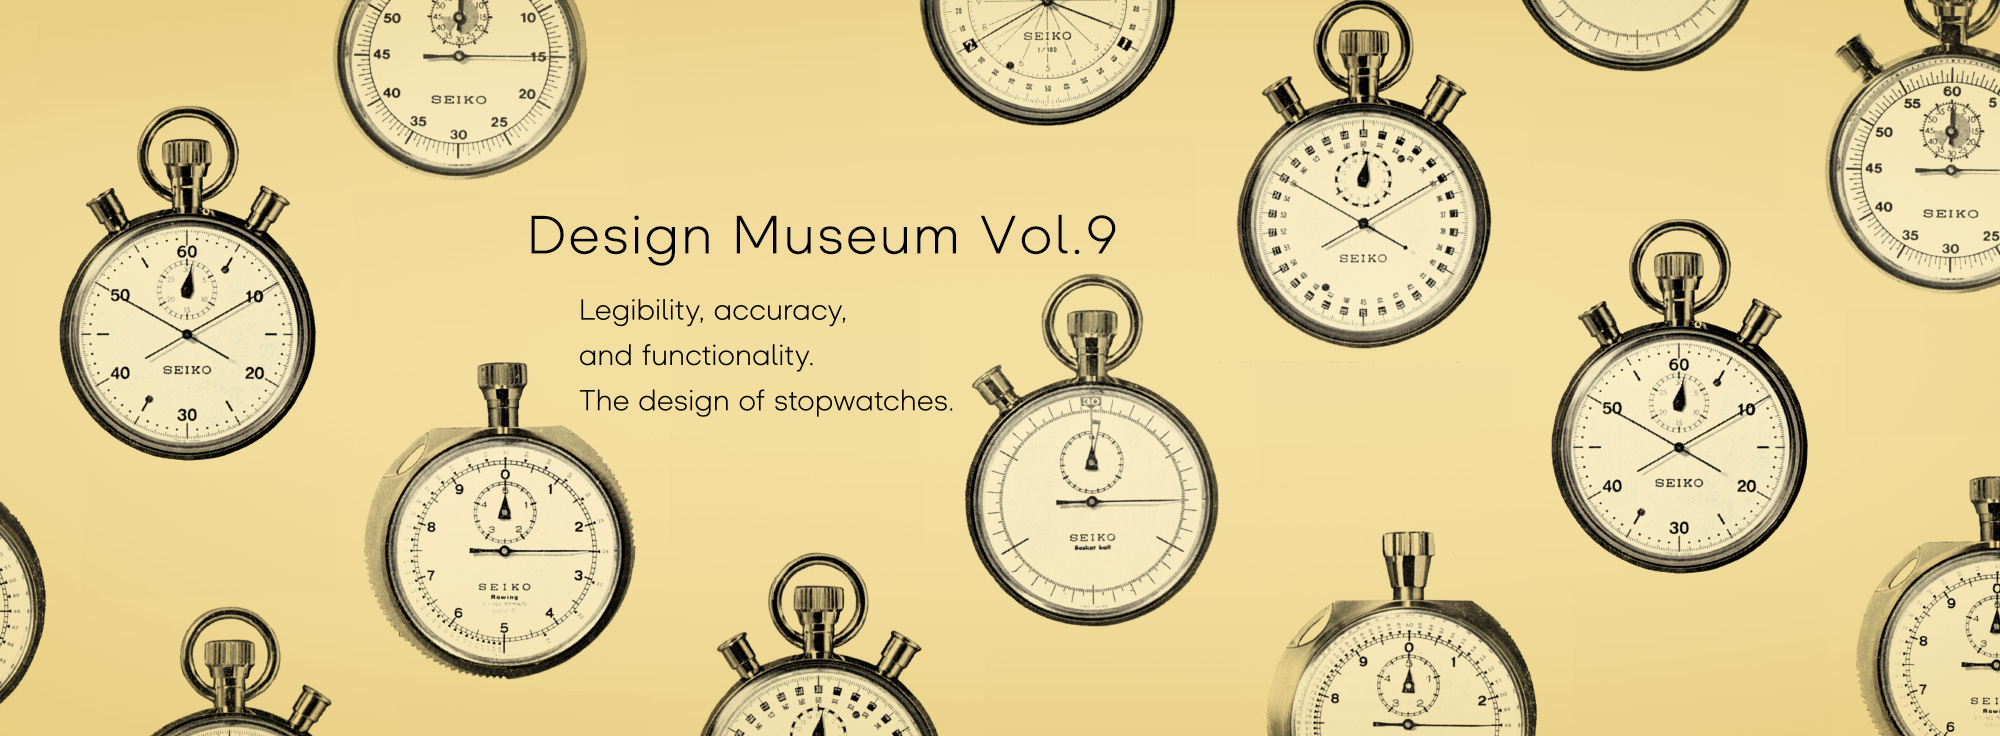 Vol.9 Legibility, accuracy, and functionality. The design of stopwatches.